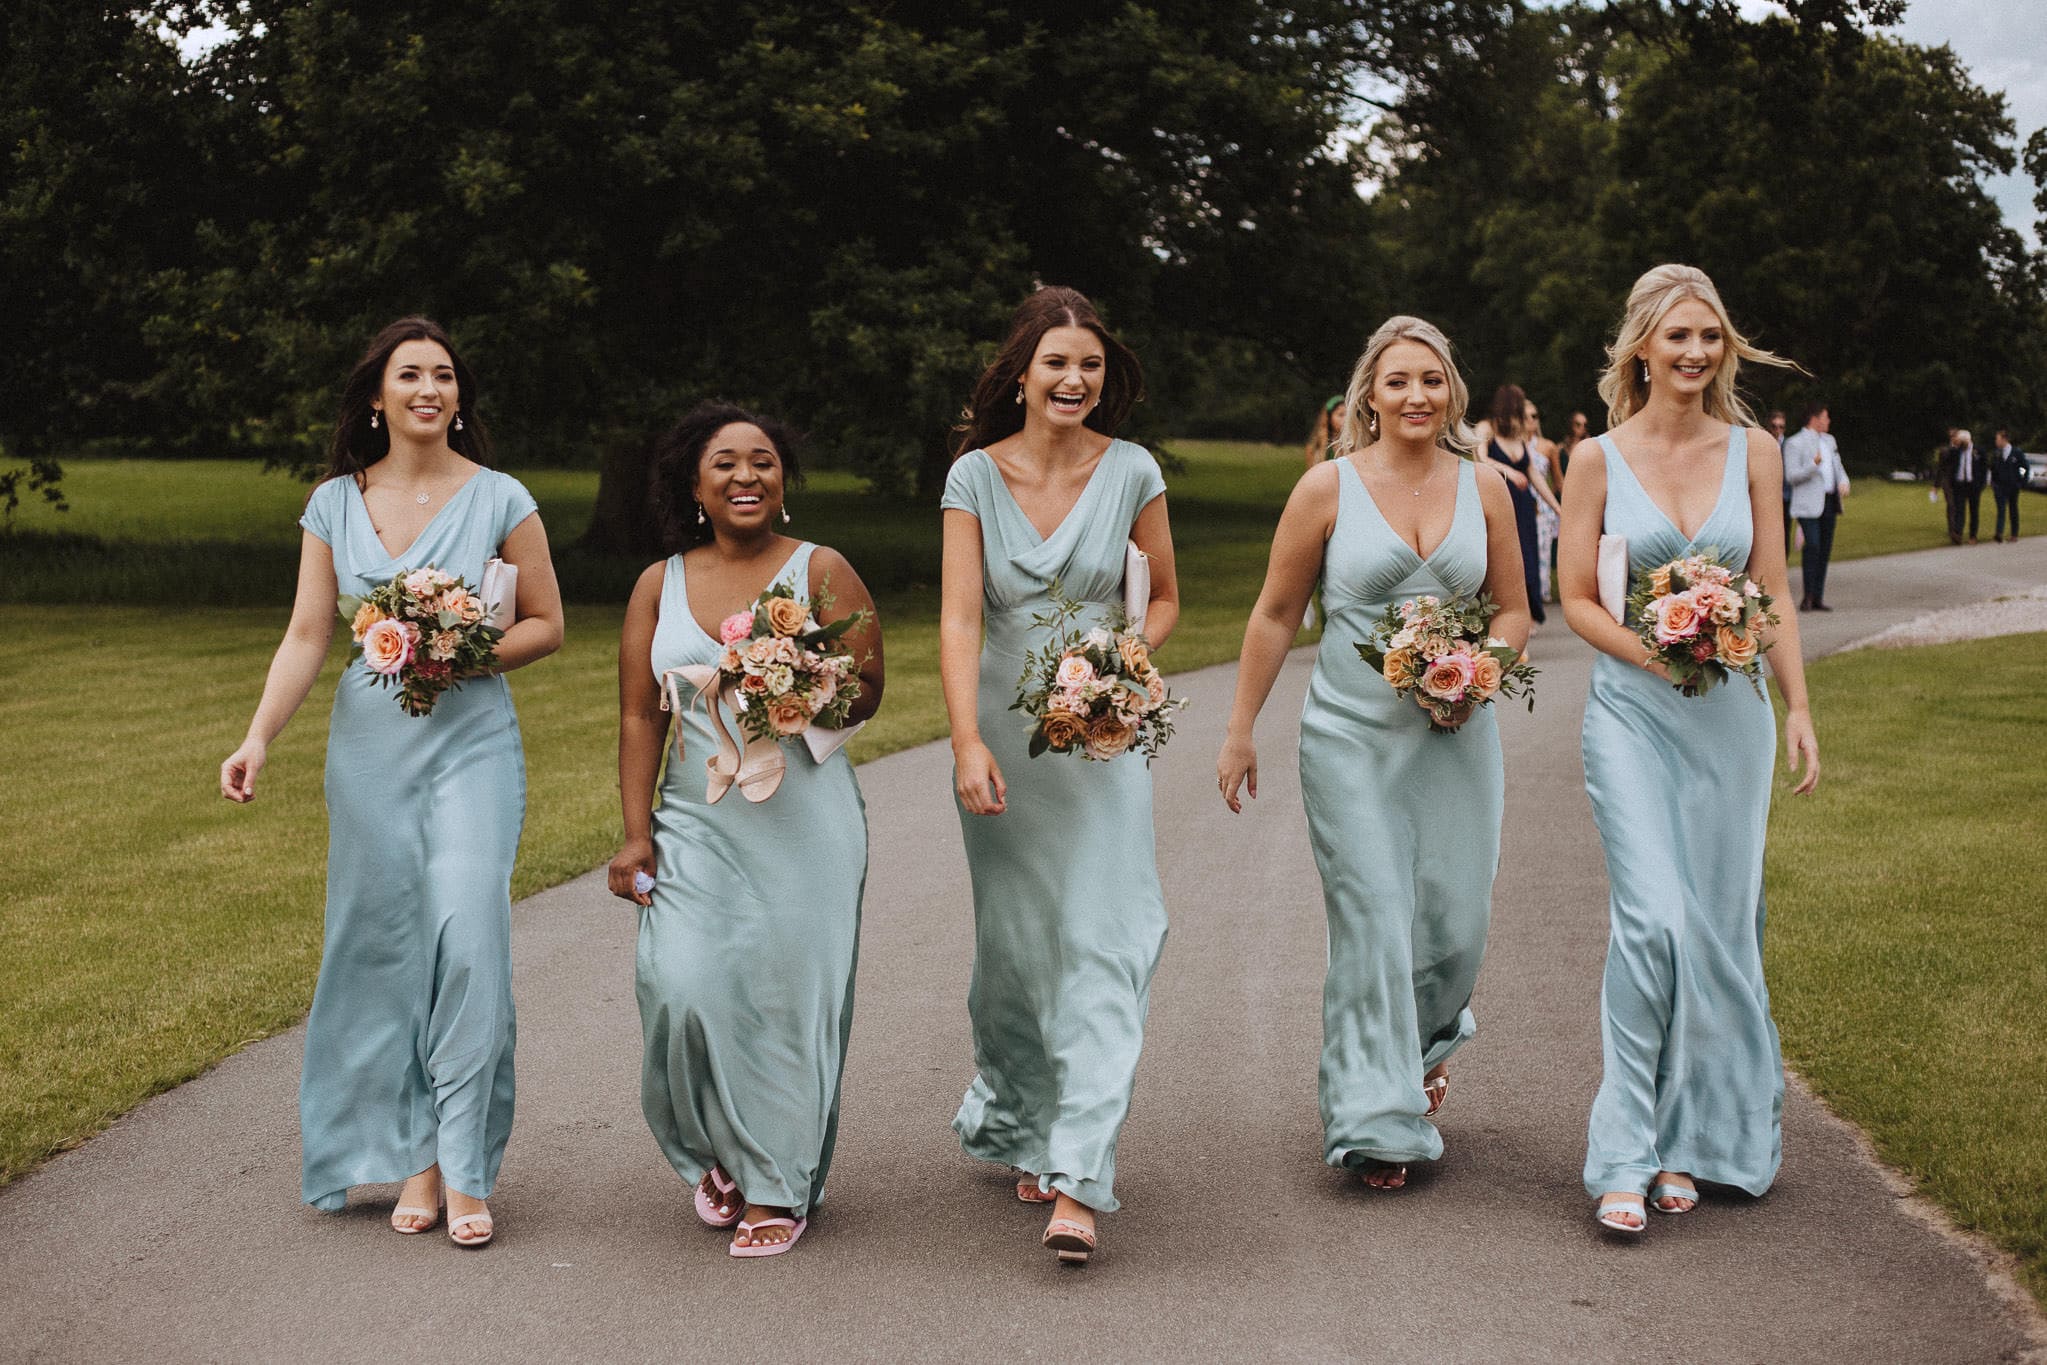 pale green Ghost bridesmaids dresses at real wedding